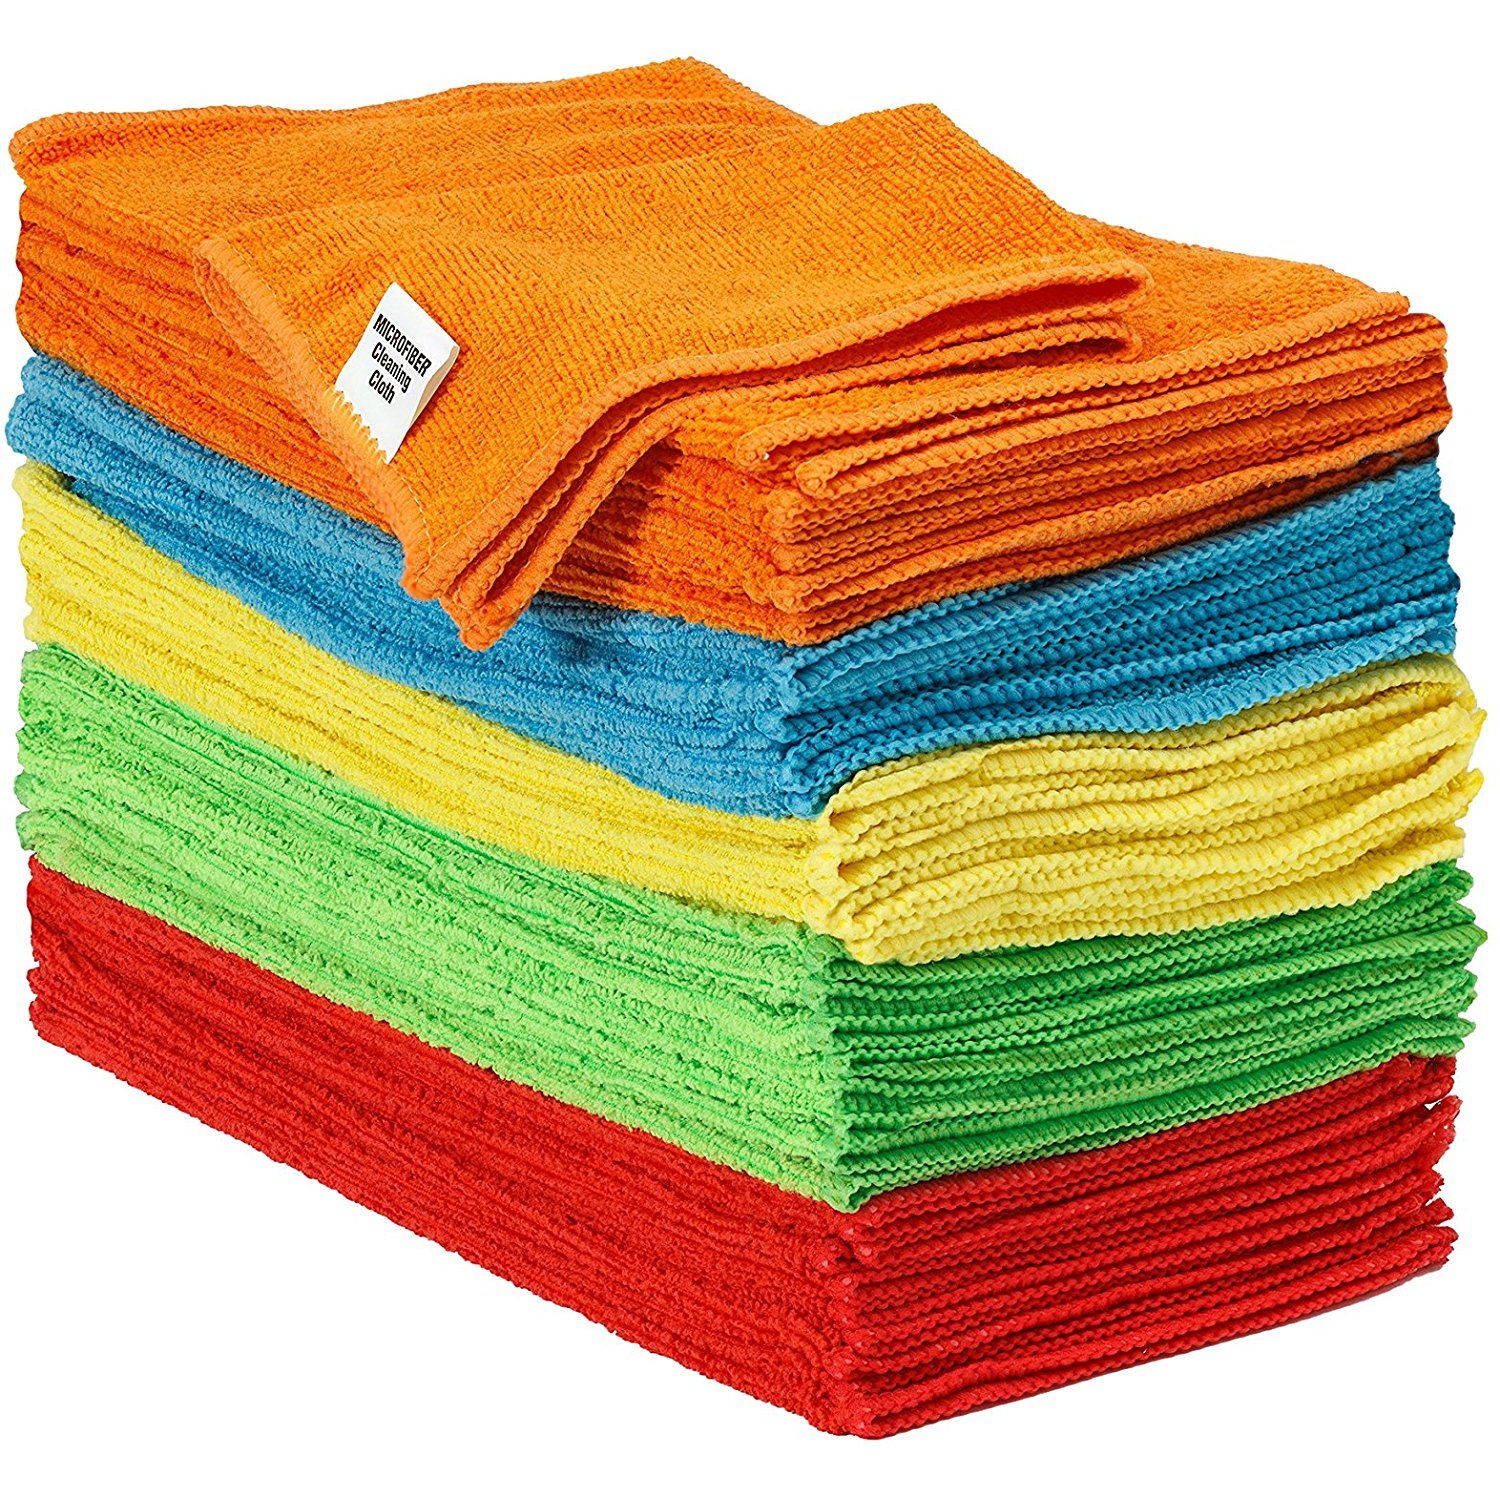 Super Absorbent 80% Polyester 20% Polyamide Lint-Free Microfiber Cleaning Cloth Polishing Car Kitchen Household MicroFibre Towel